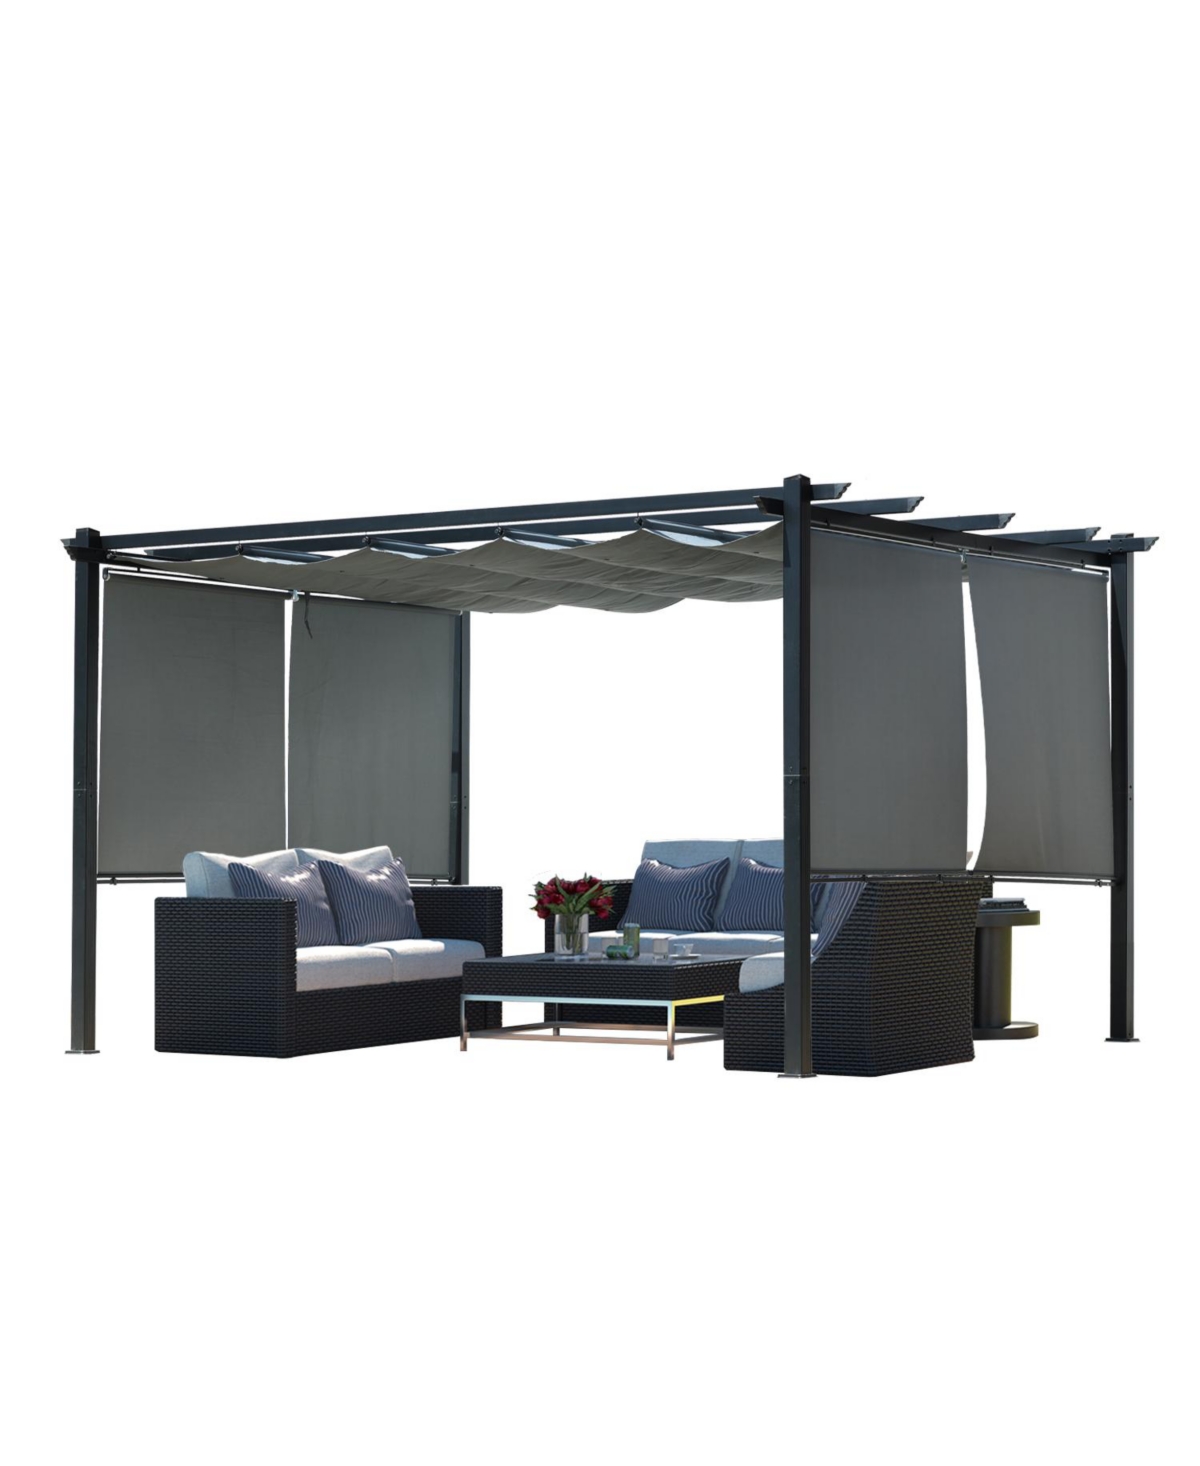 120''x155.1''x87.4'' Outdoor Pergola with Retractable Canopy, Aluminum Frame, 4 Pieces Patio Sun Shade Shelter for Backyard. - Brown